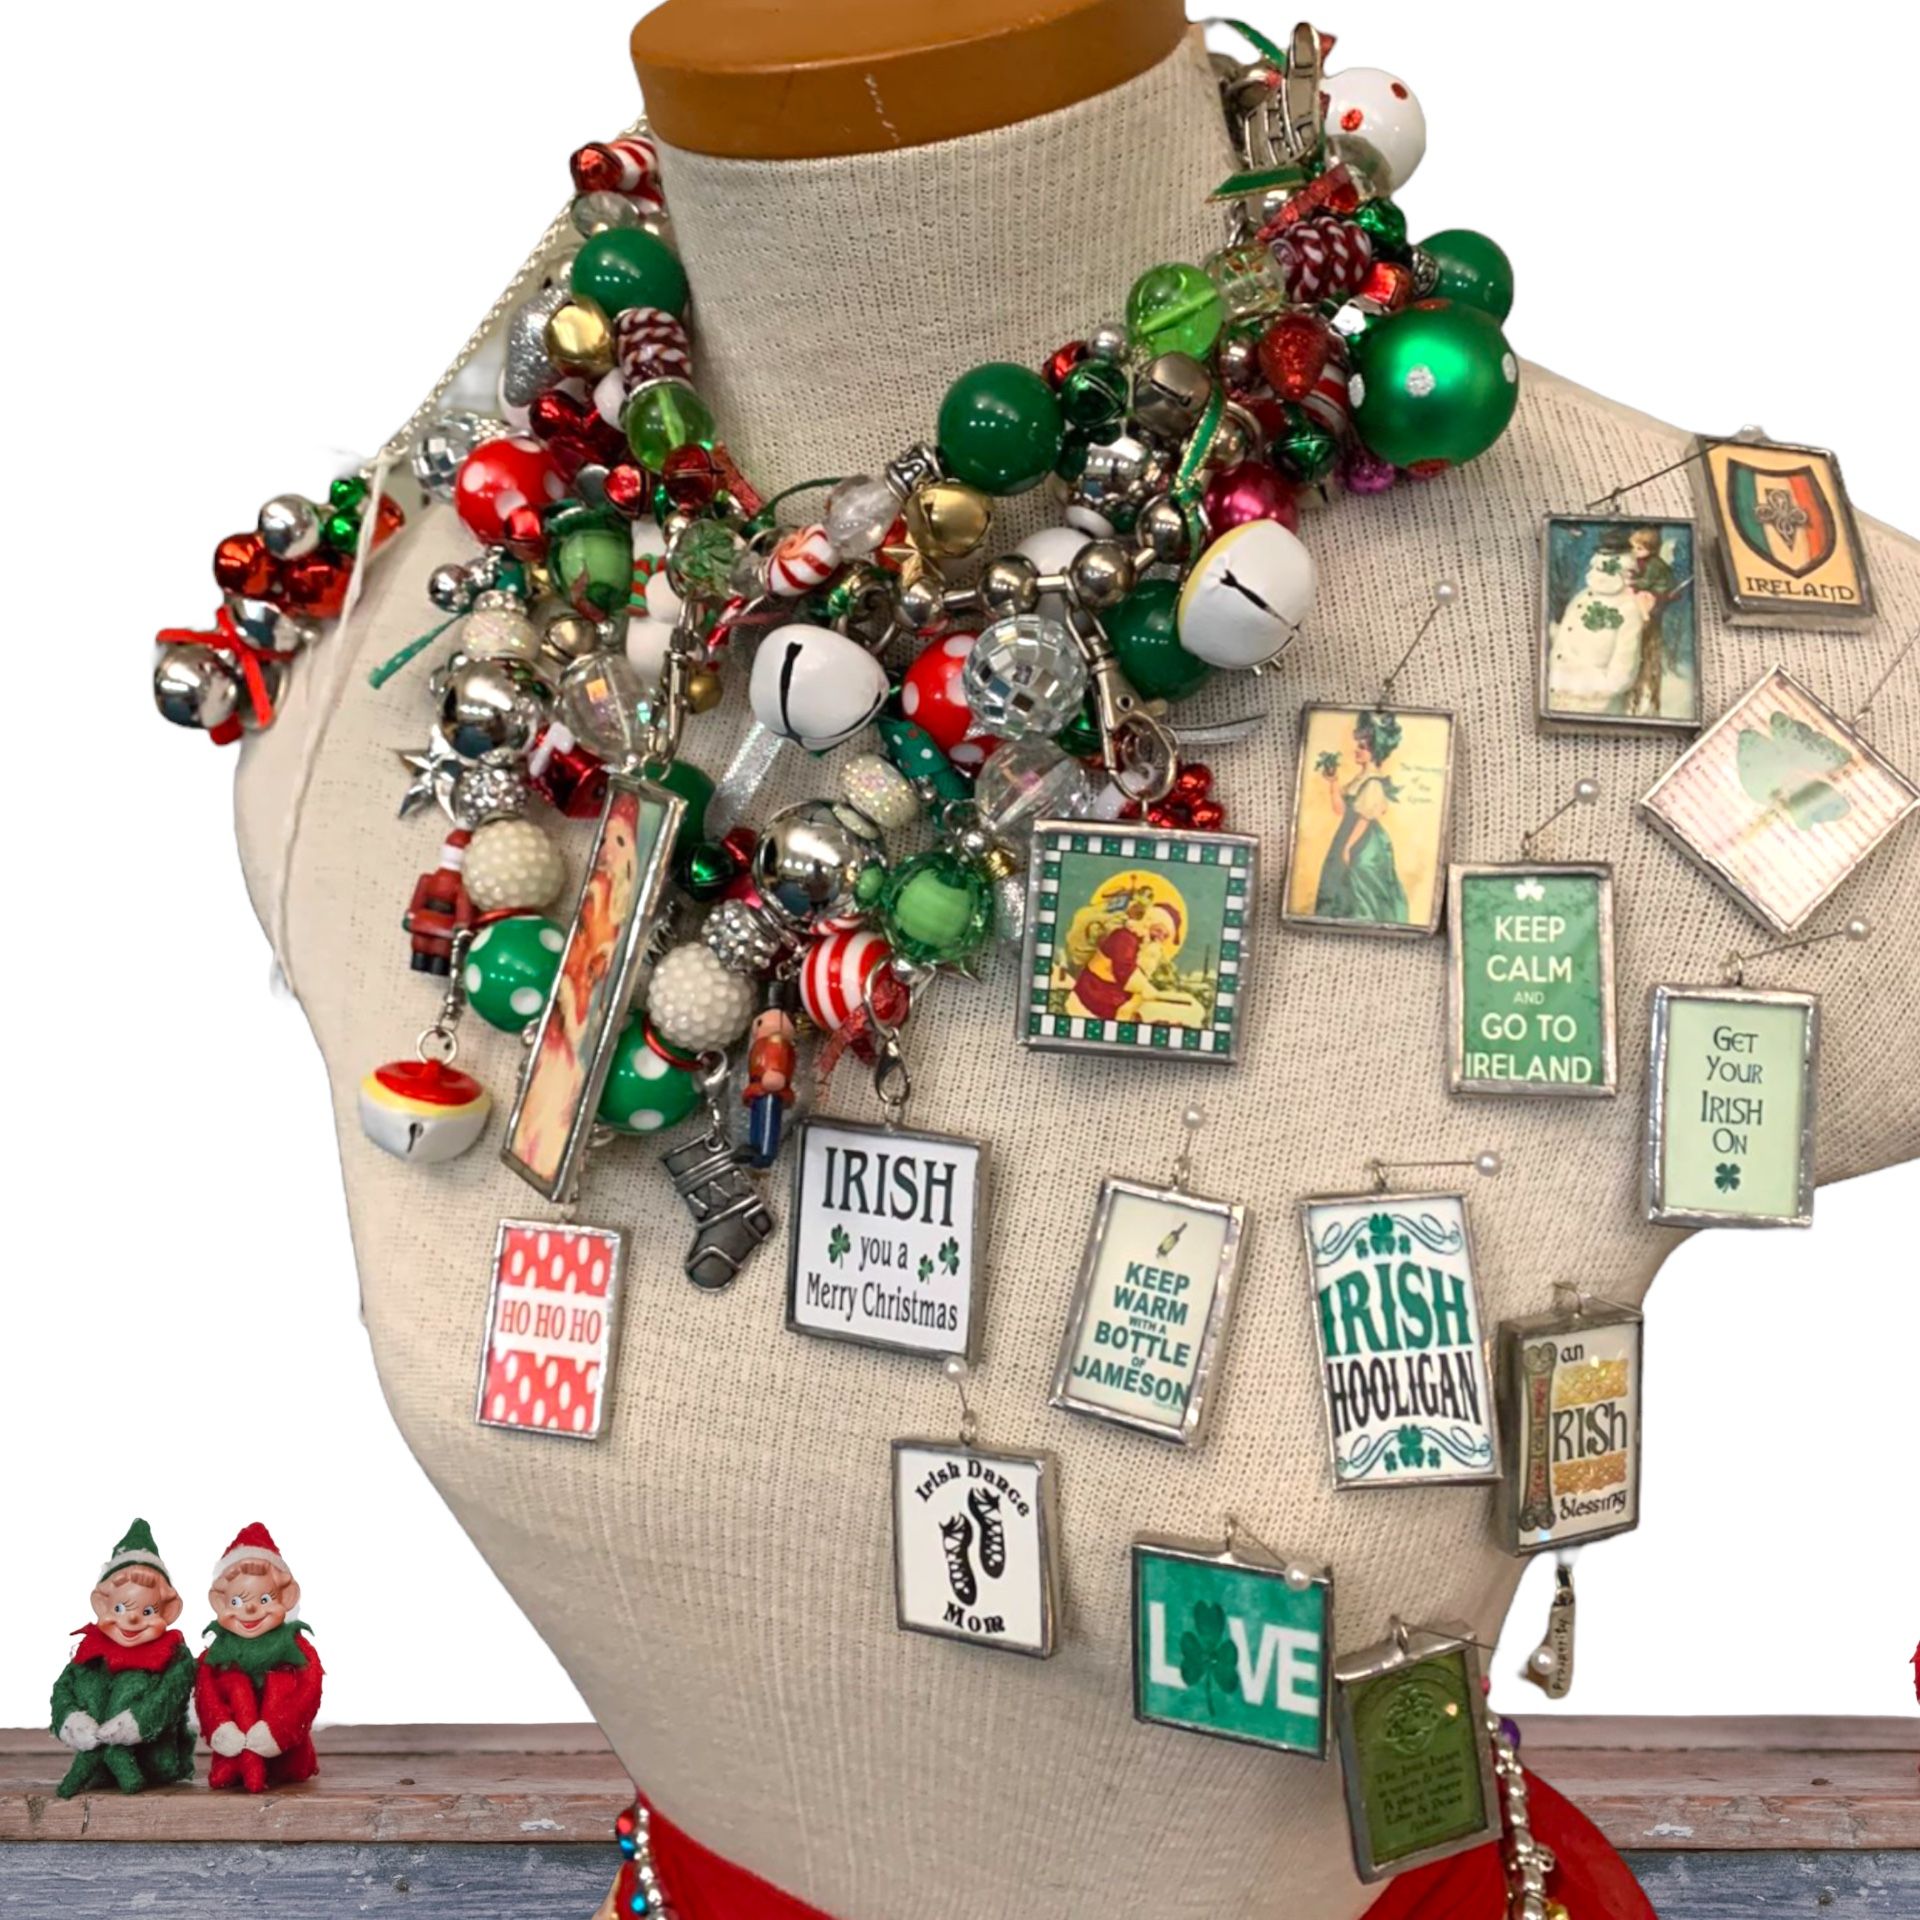 Custom Made Reversible Christmas and Holiday Photo Pendent Necklace Unique Gift or Stocking Stuffer